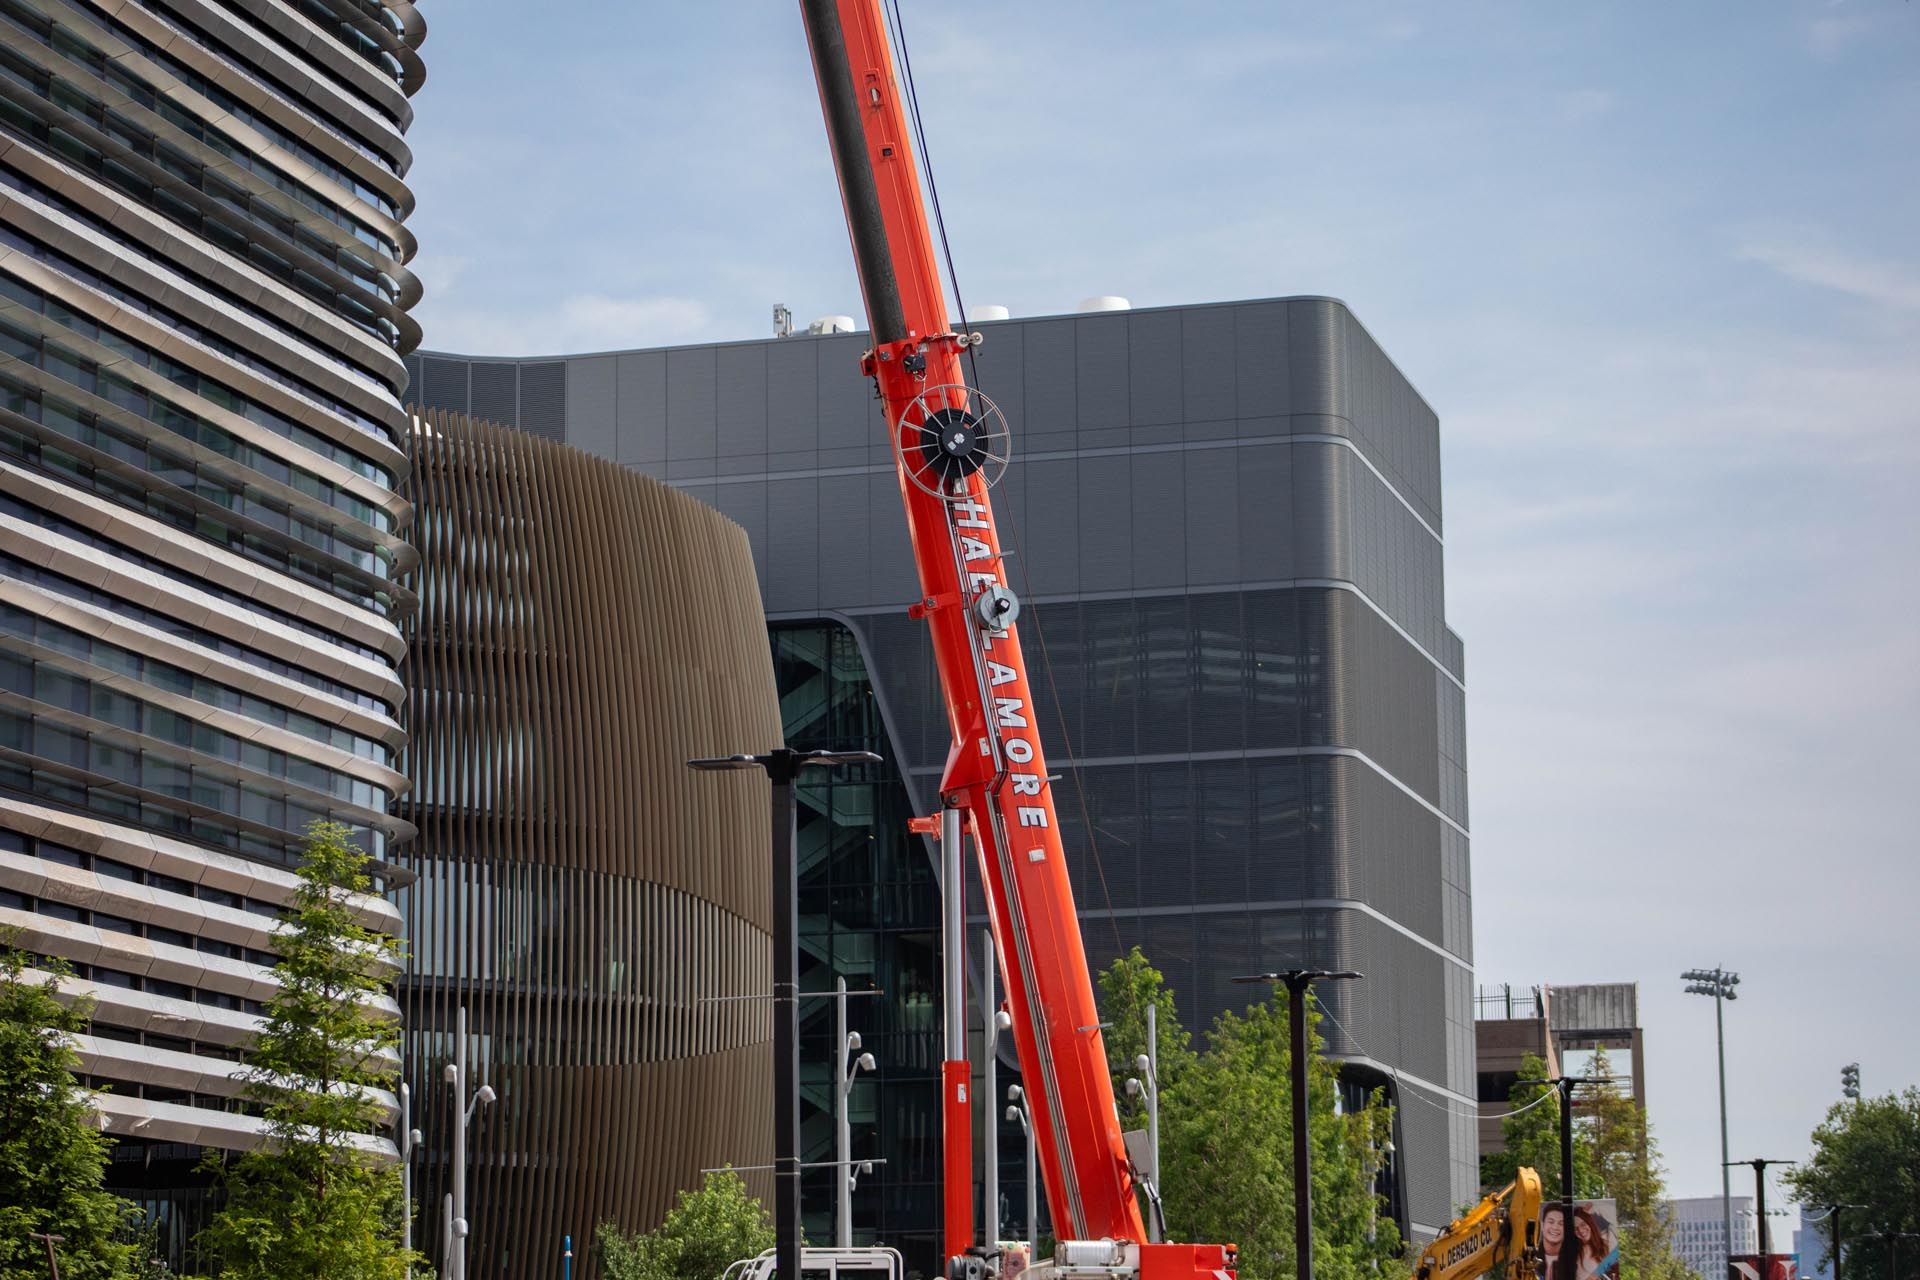 Hallamore Corporation offers commercial crane services throughout New England.